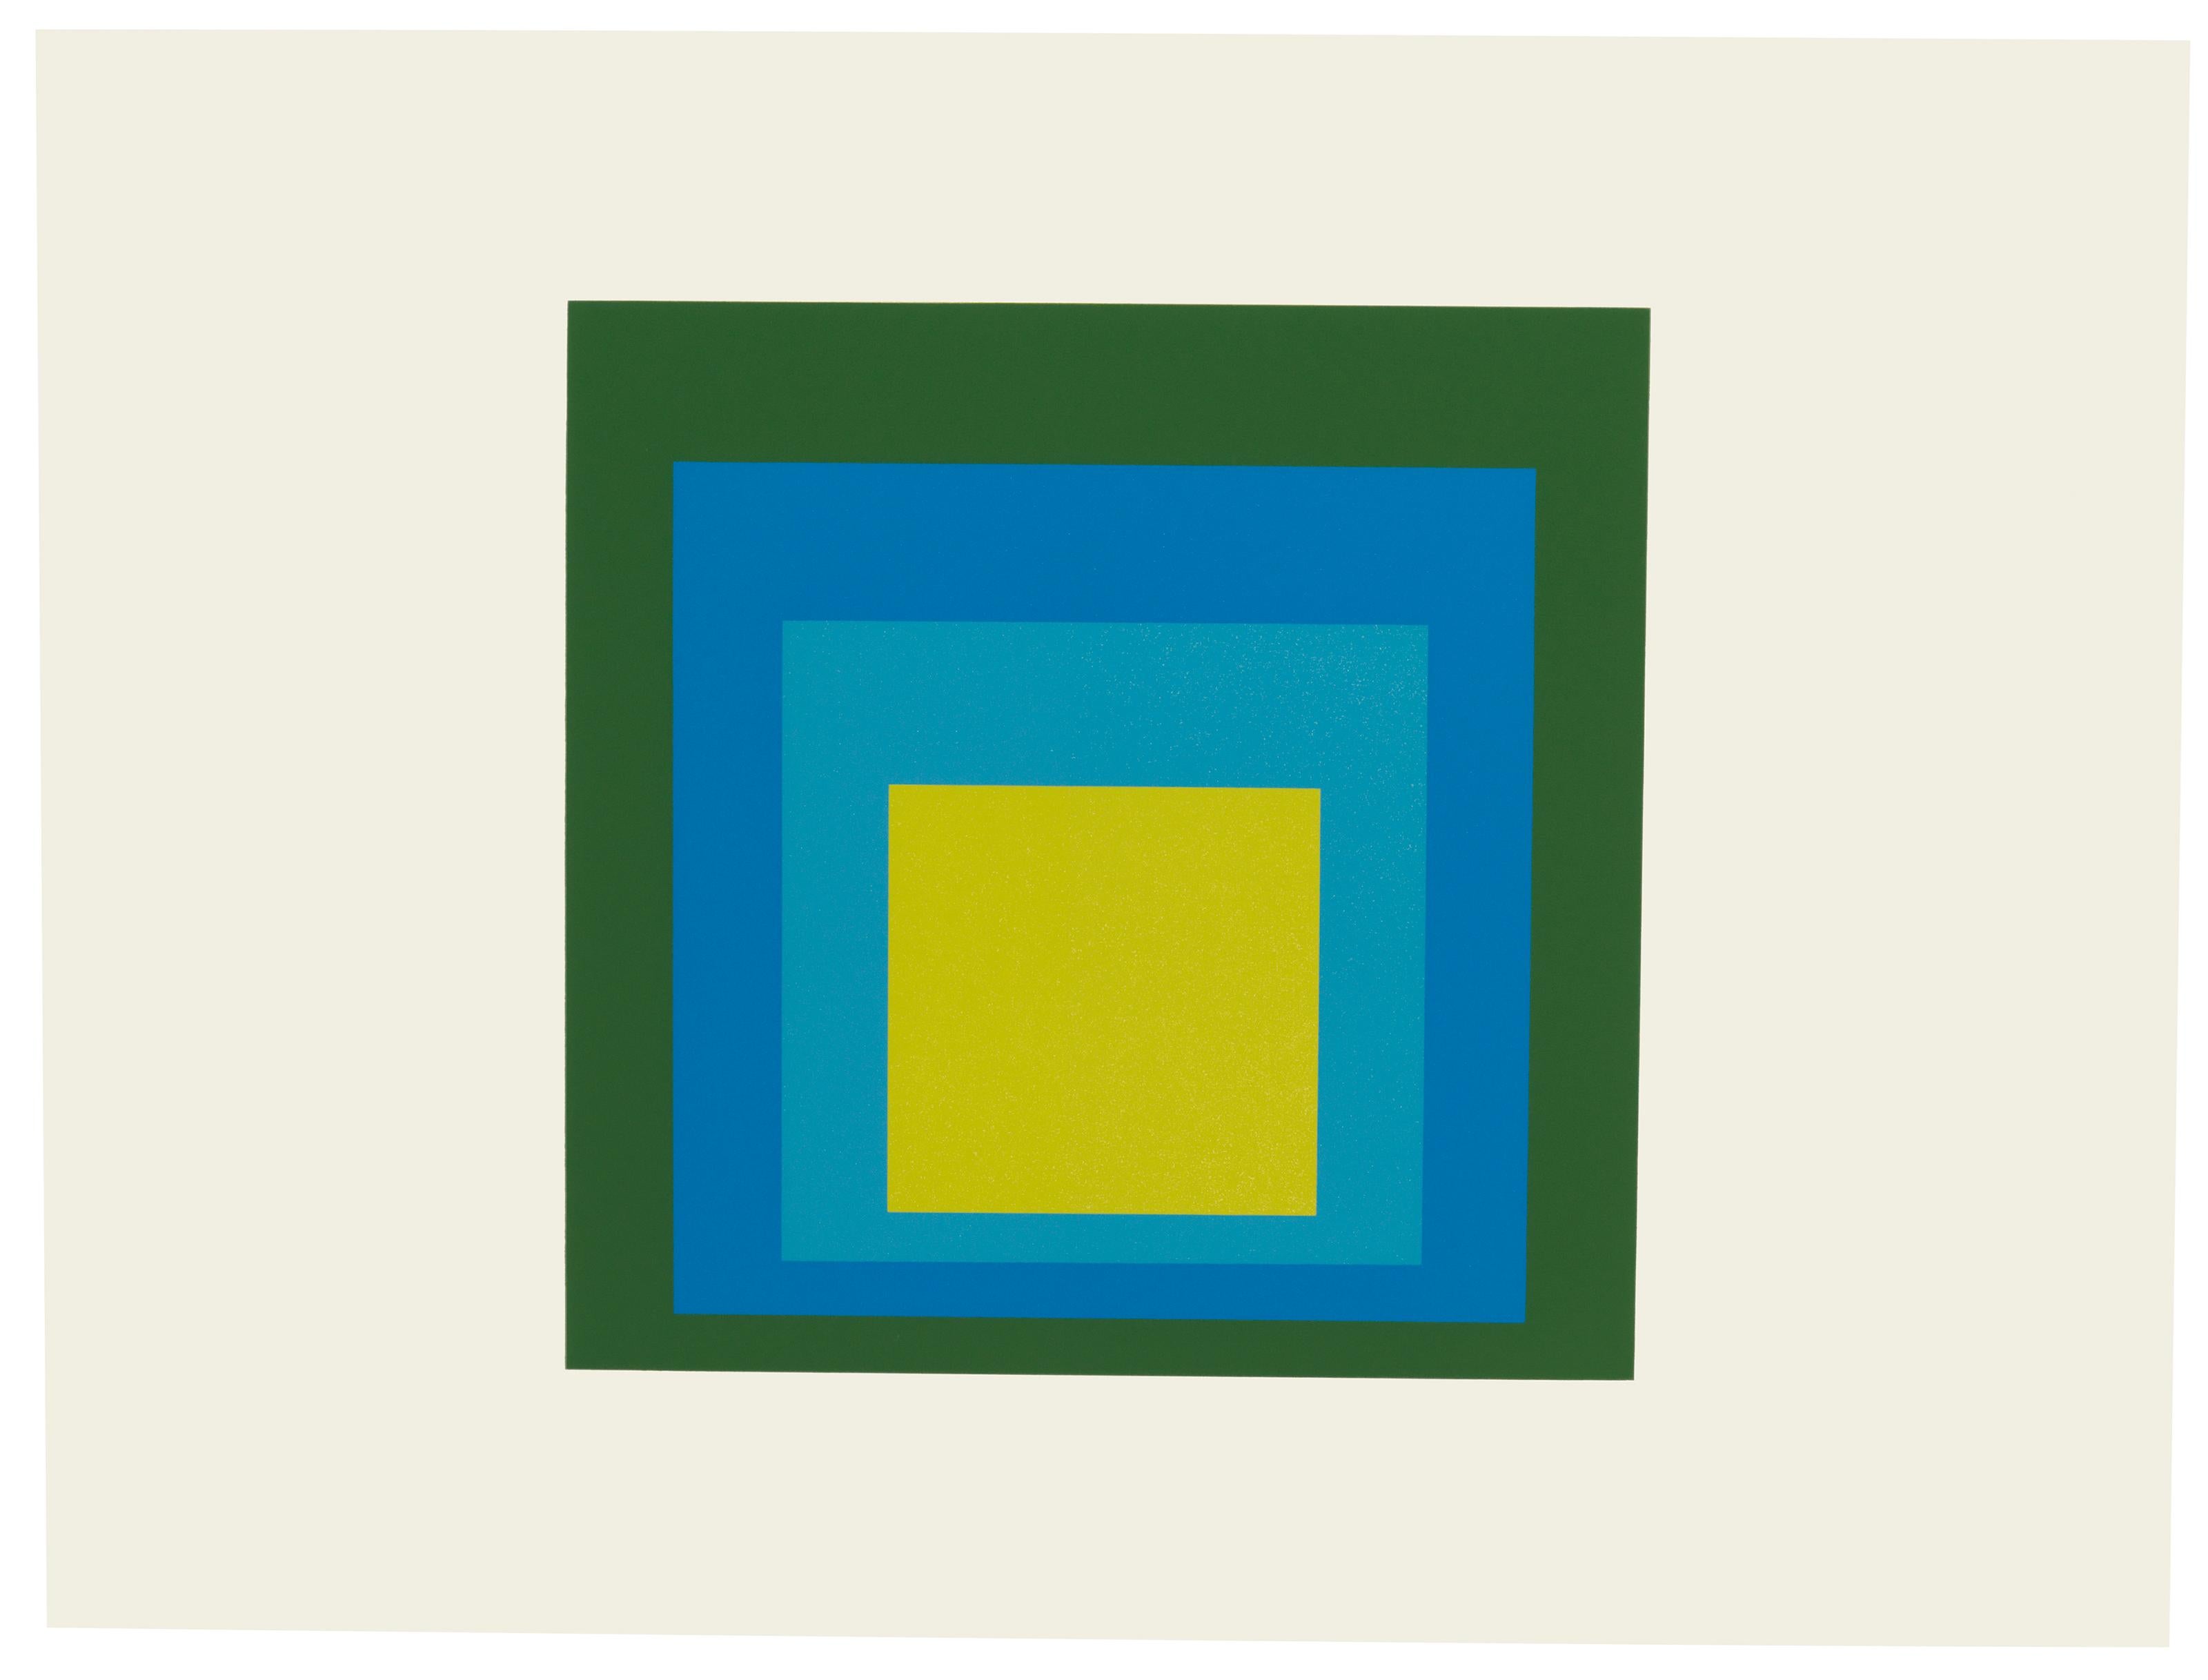 Formulation: Articulation I & II -- Colour Theory, Minimalism by Josef Albers 1